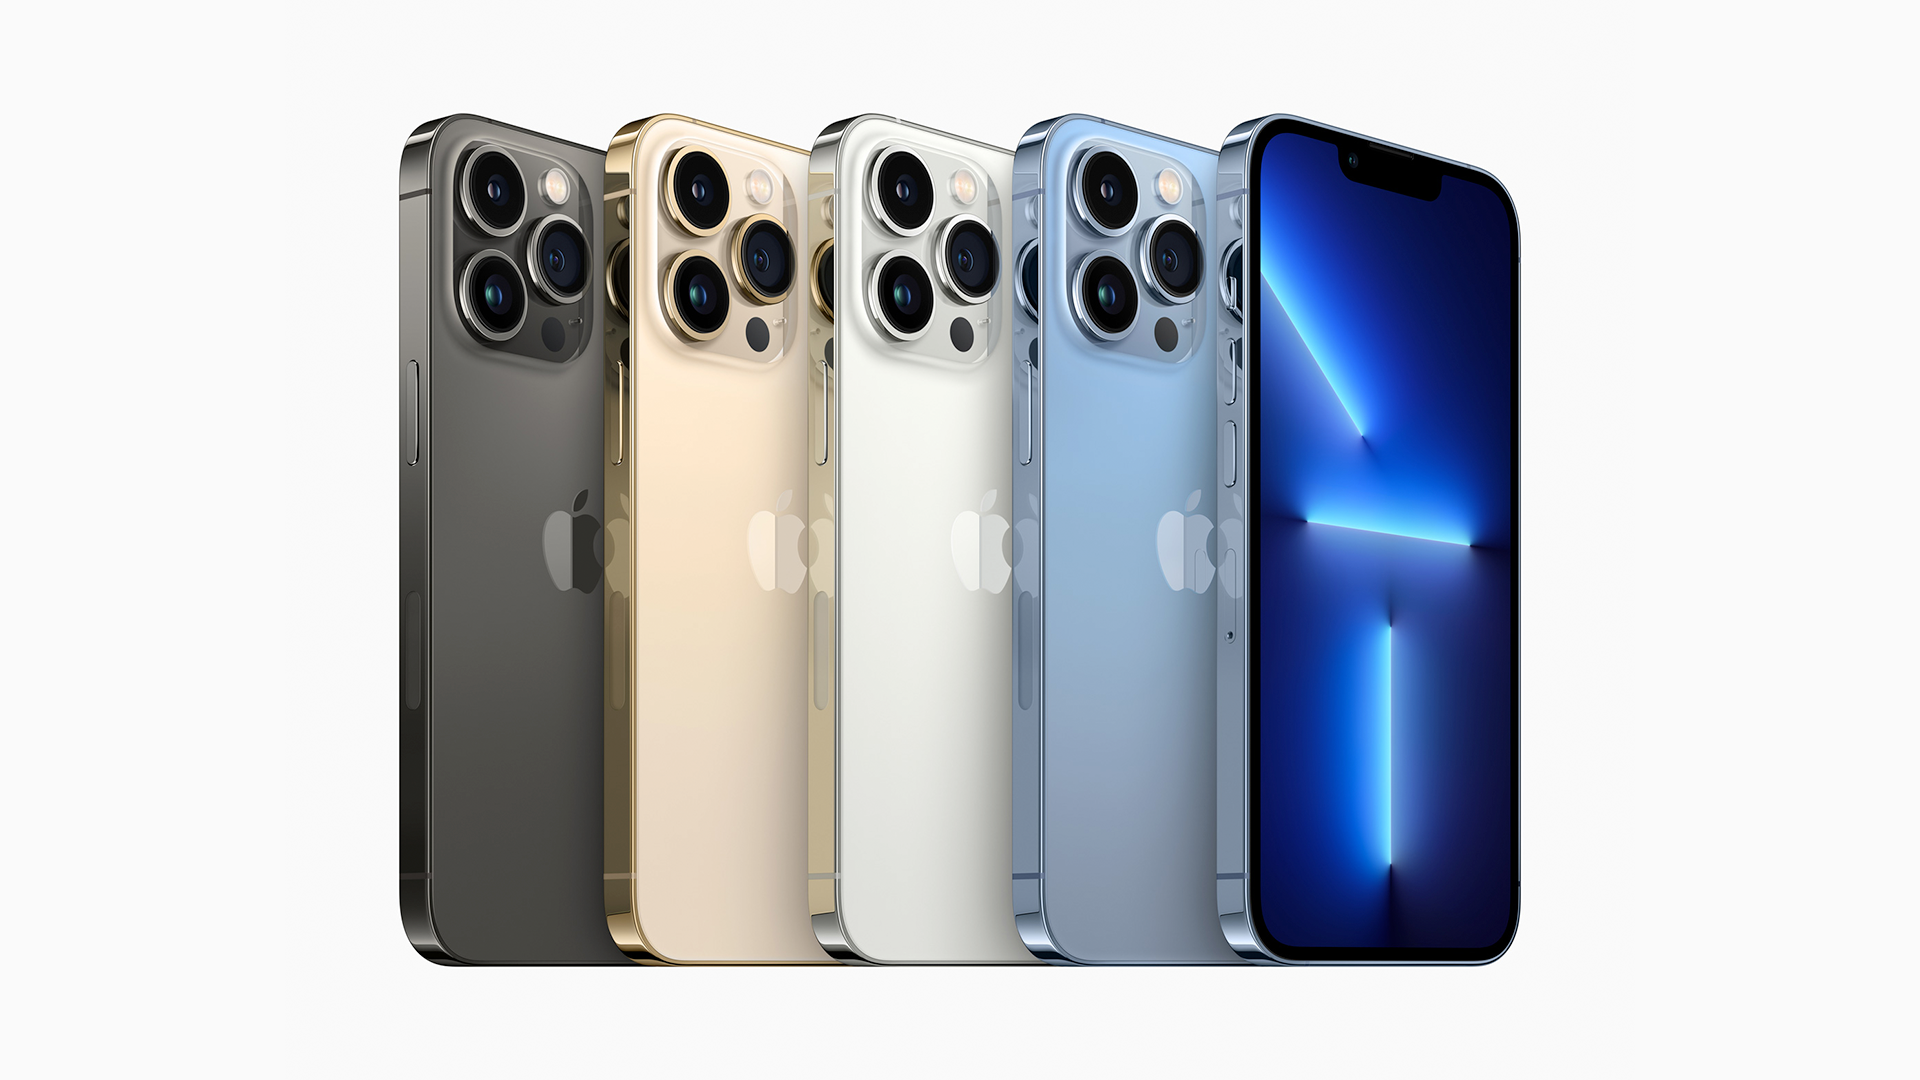 The full iPhone 13 Pro and Pro Max lineup.